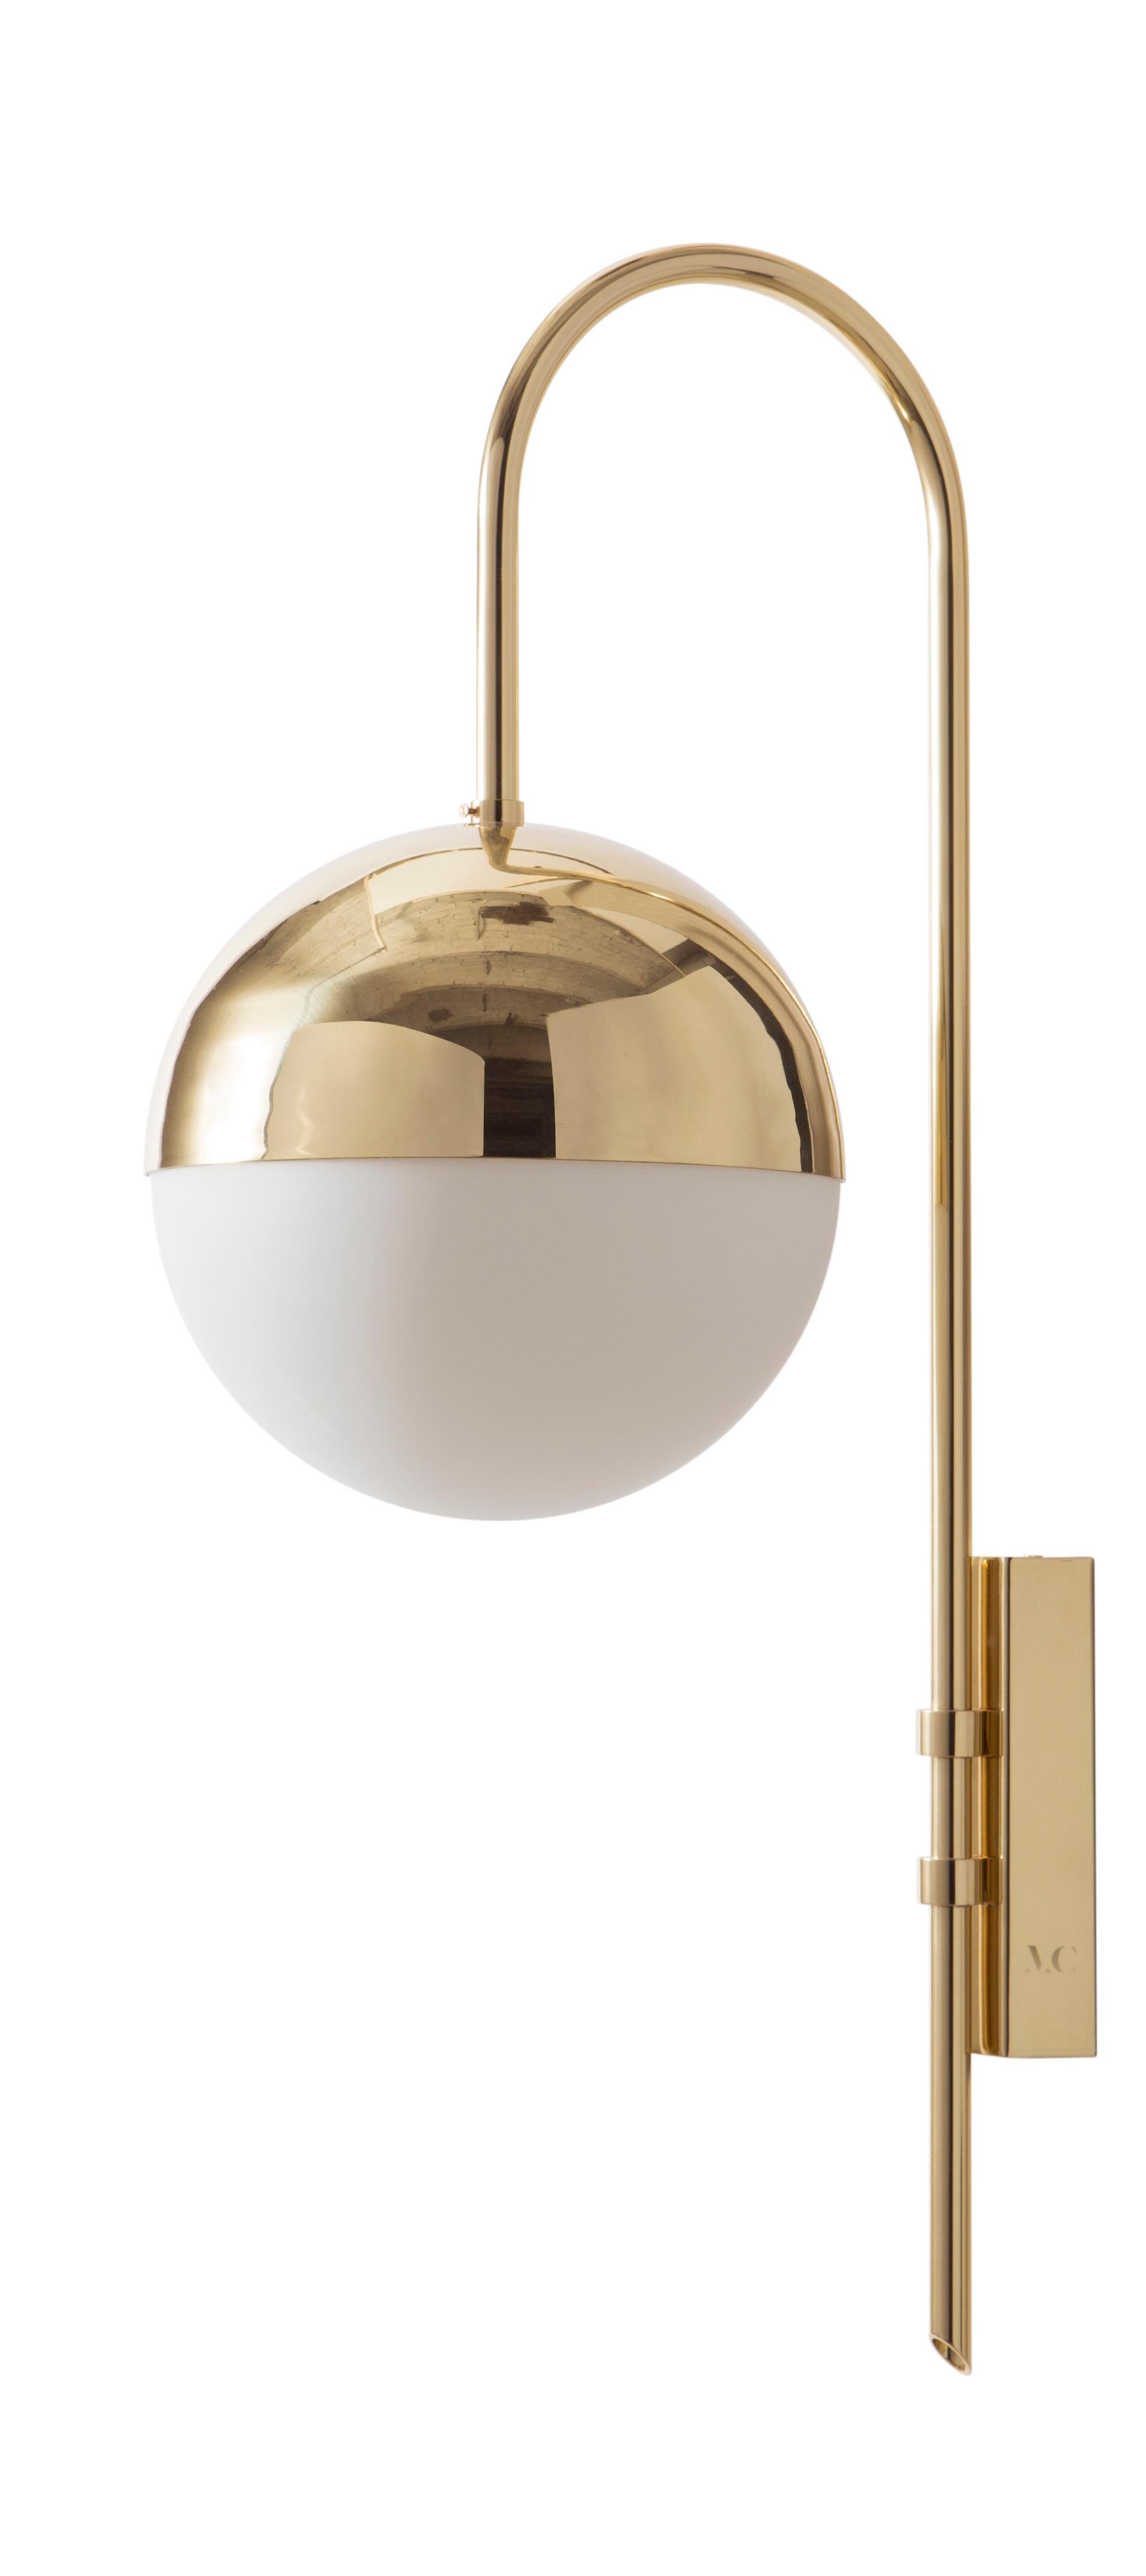 Set of 2 brass wall lamp 01 by Magic Circus Editions
Dimensions: H 77 x W 25 x D 36.5 cm
Materials: Smooth brass, mouth blown glass

Available finishes: Brass, nickel
All our lamps can be wired according to each country. If sold to the USA it